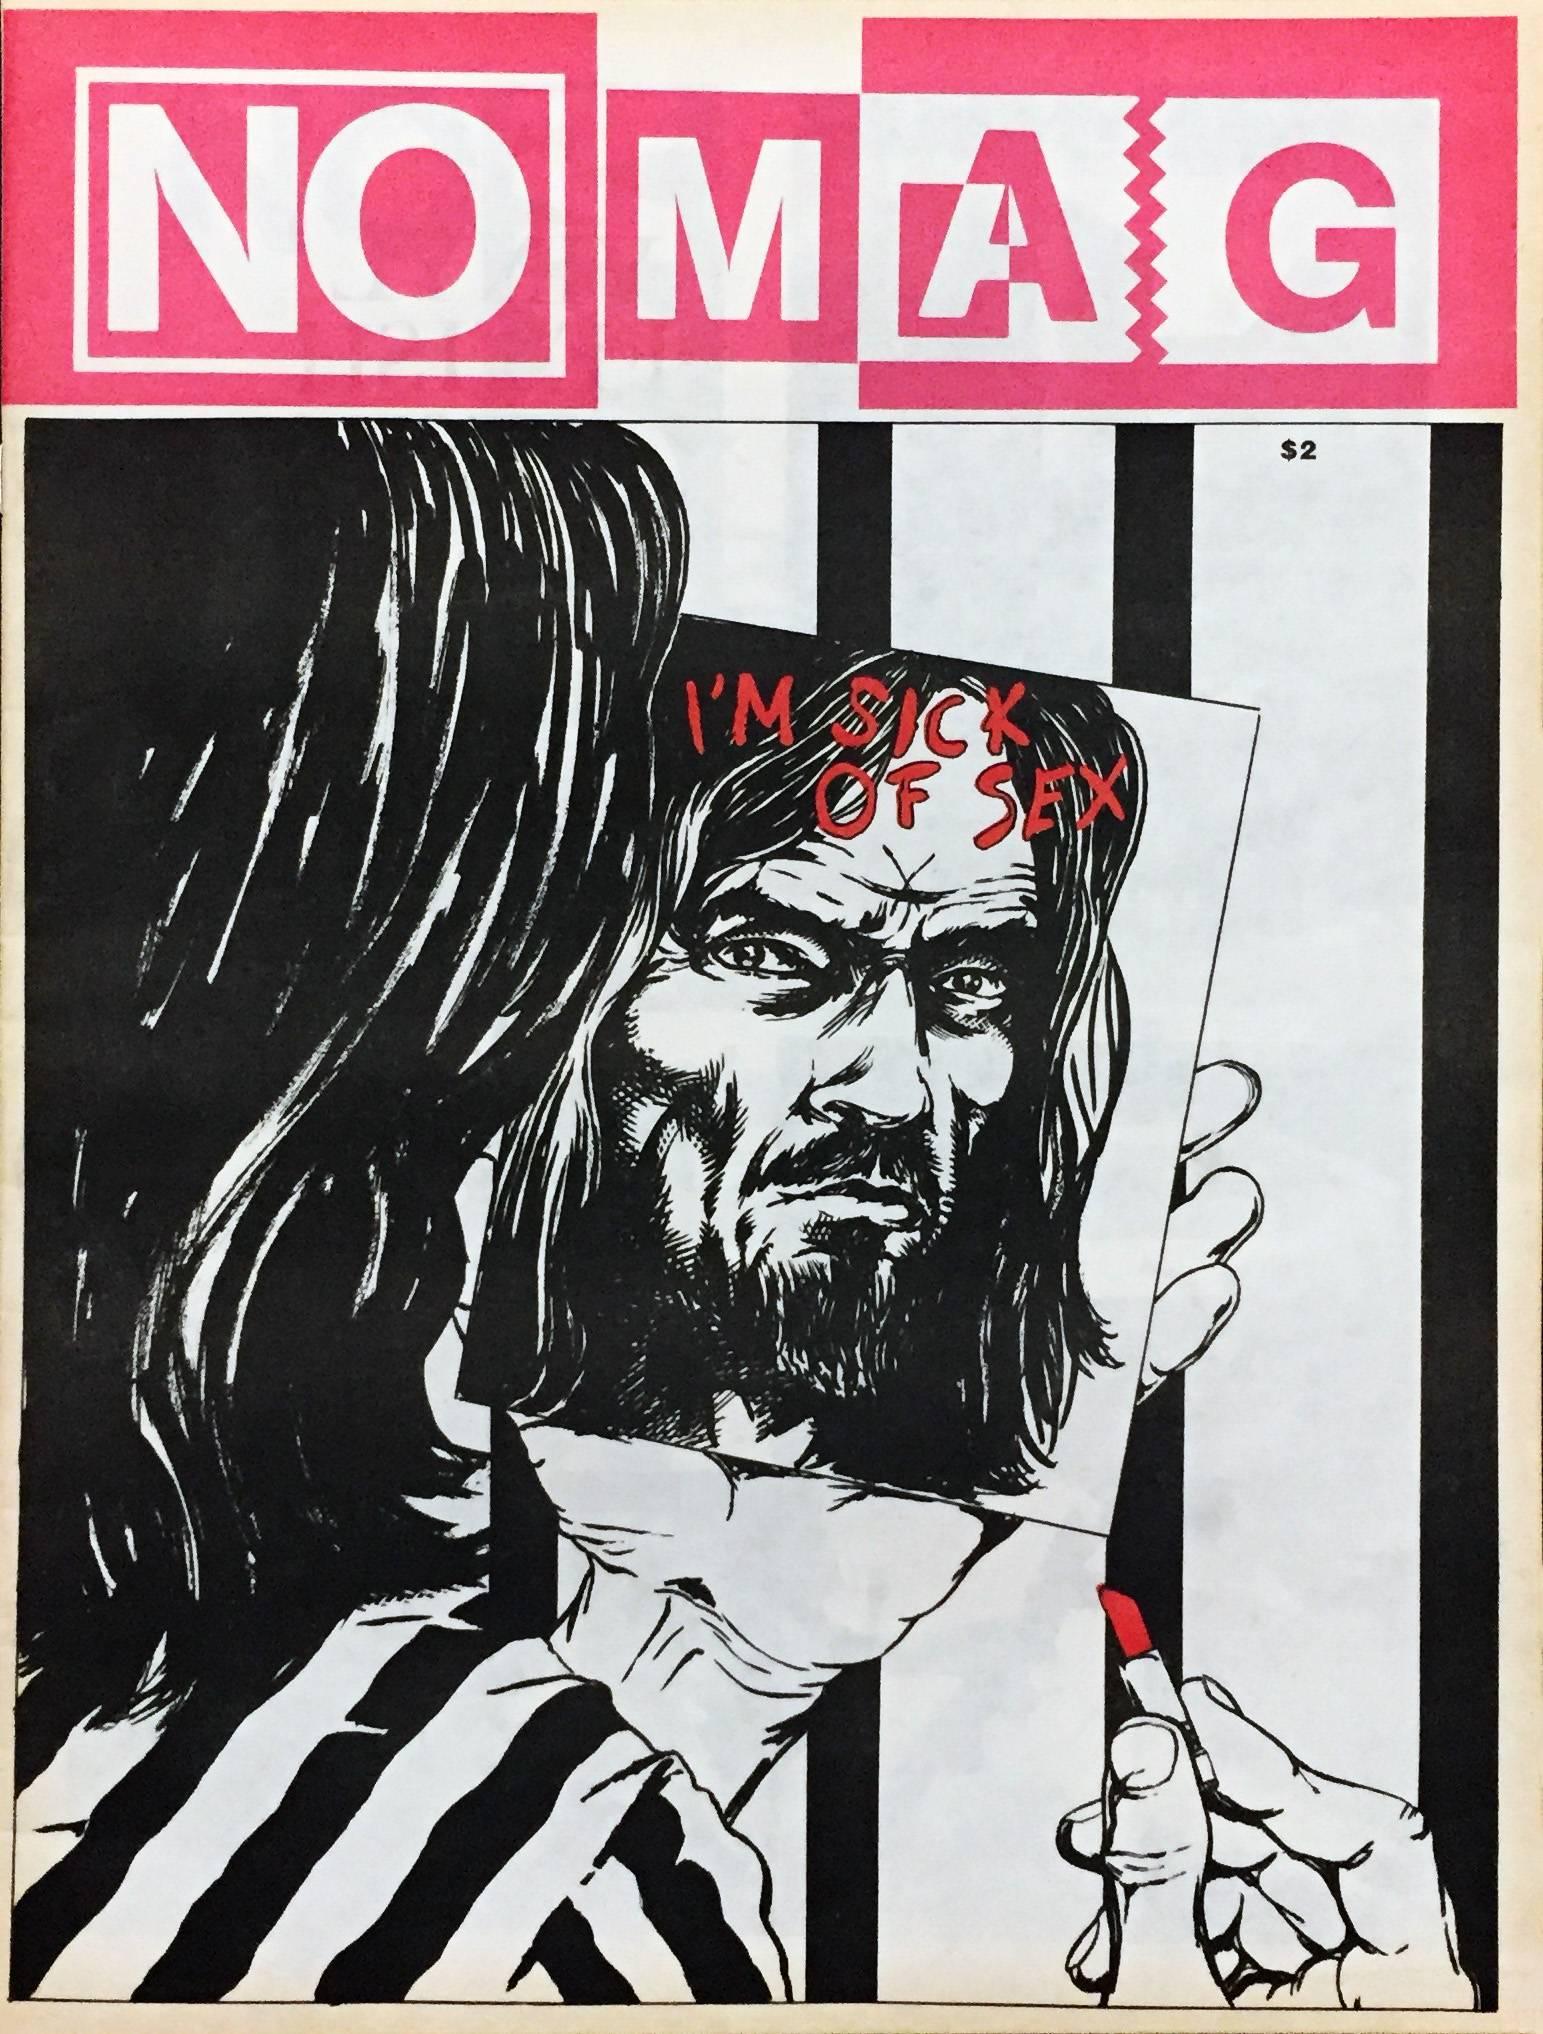 Raymond Pettibon, "No Mag,'" 1981
A rare late 70's/early 80's Los Angeles Punk scene publication featuring several stand out illustrations by Raymond Pettibon
Medium: Newspaper magazine, offset printed
Minor aging to cover commensurate with age &